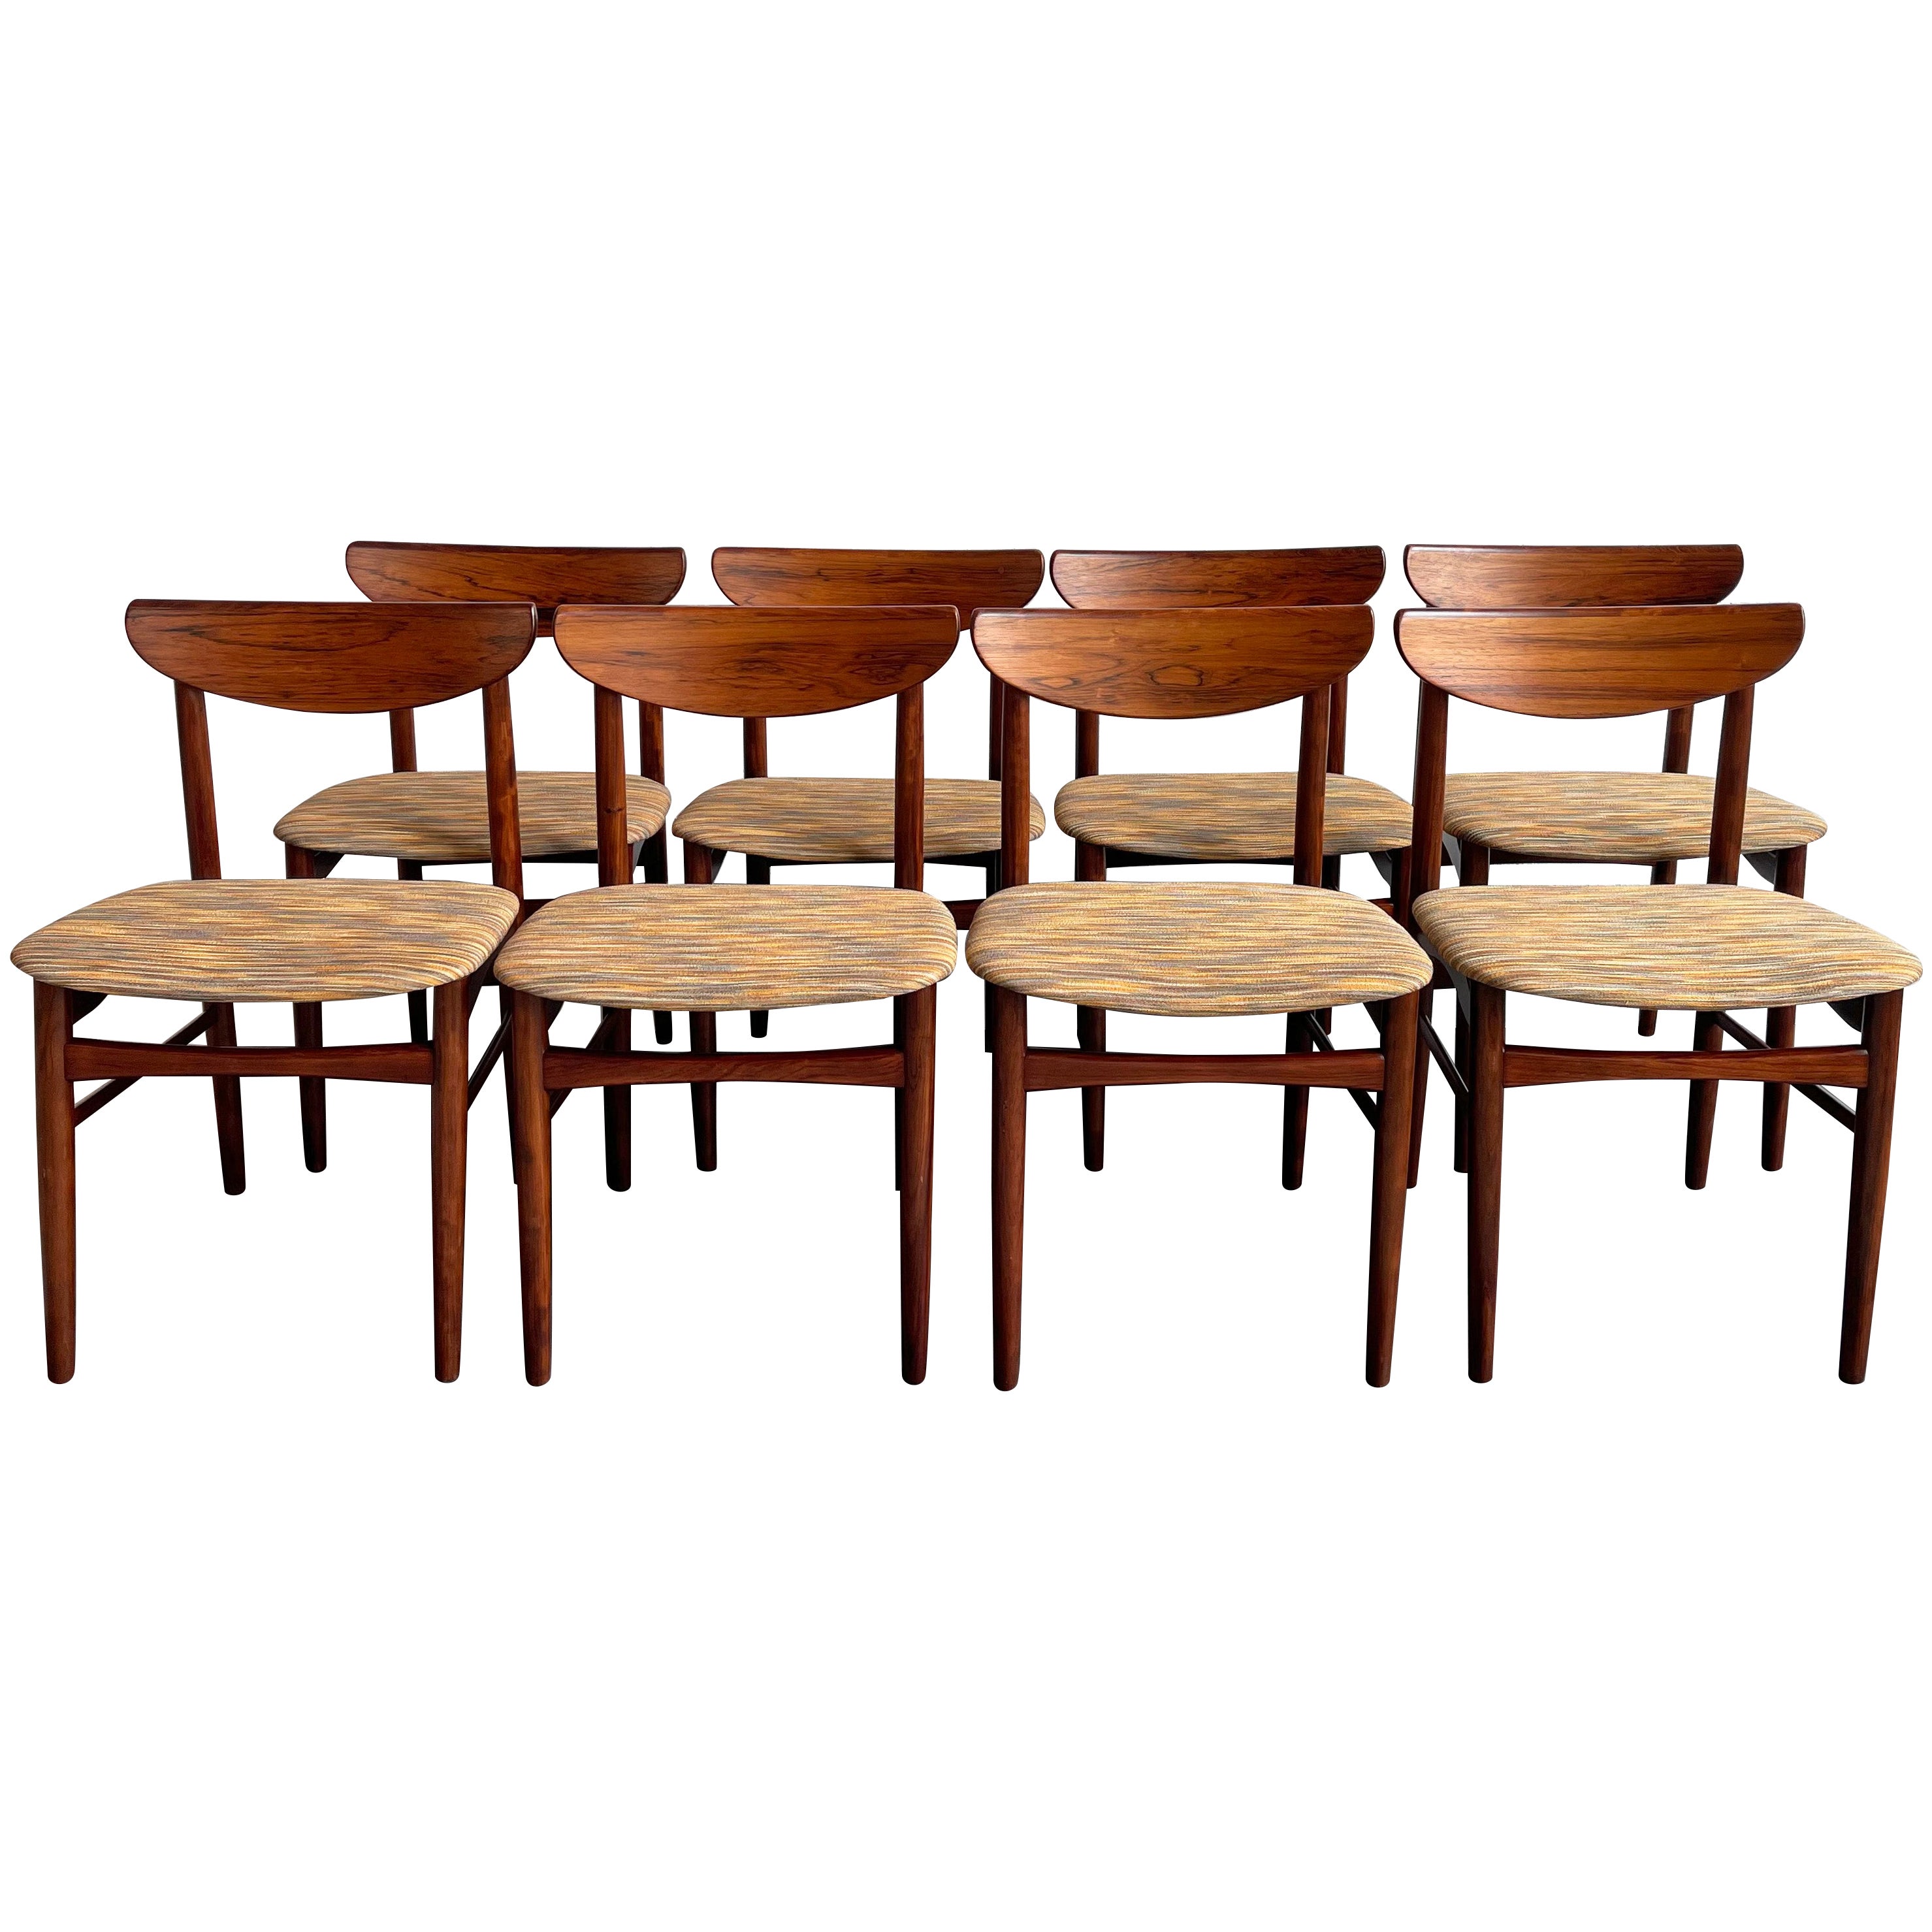 Danish Modern Rosewood Dining Chairs By Kurt Østervig For K.P. Møbler For Sale